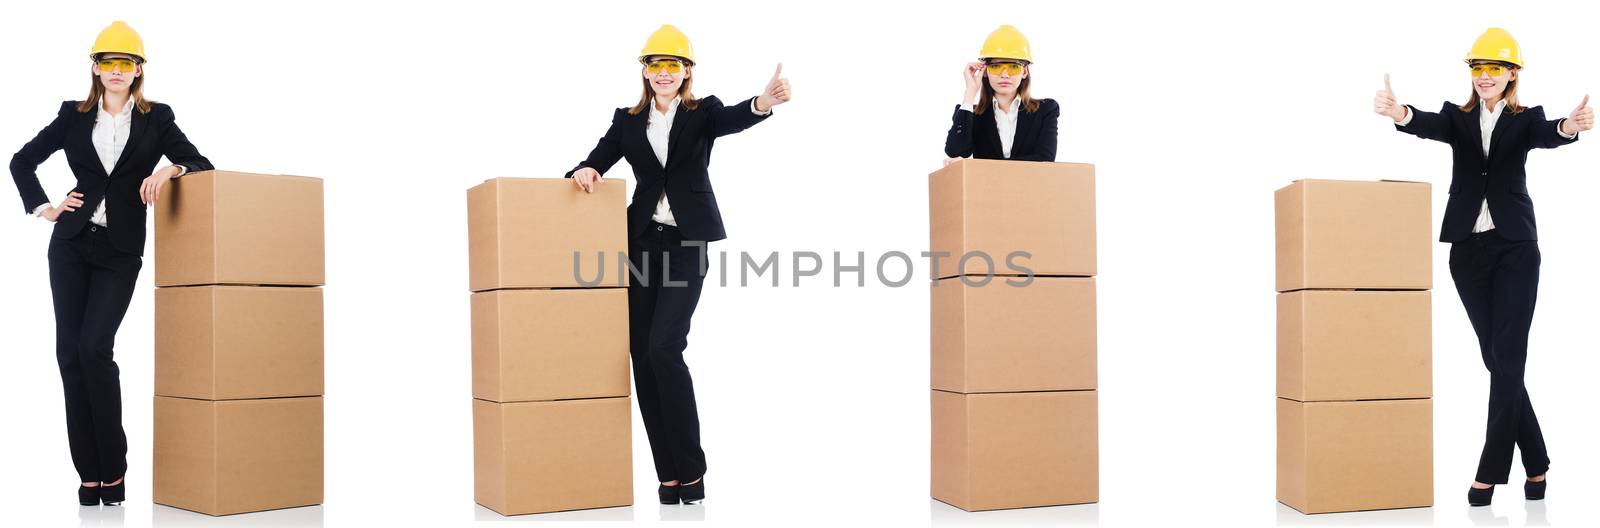 Woman builder with box isolated on white 